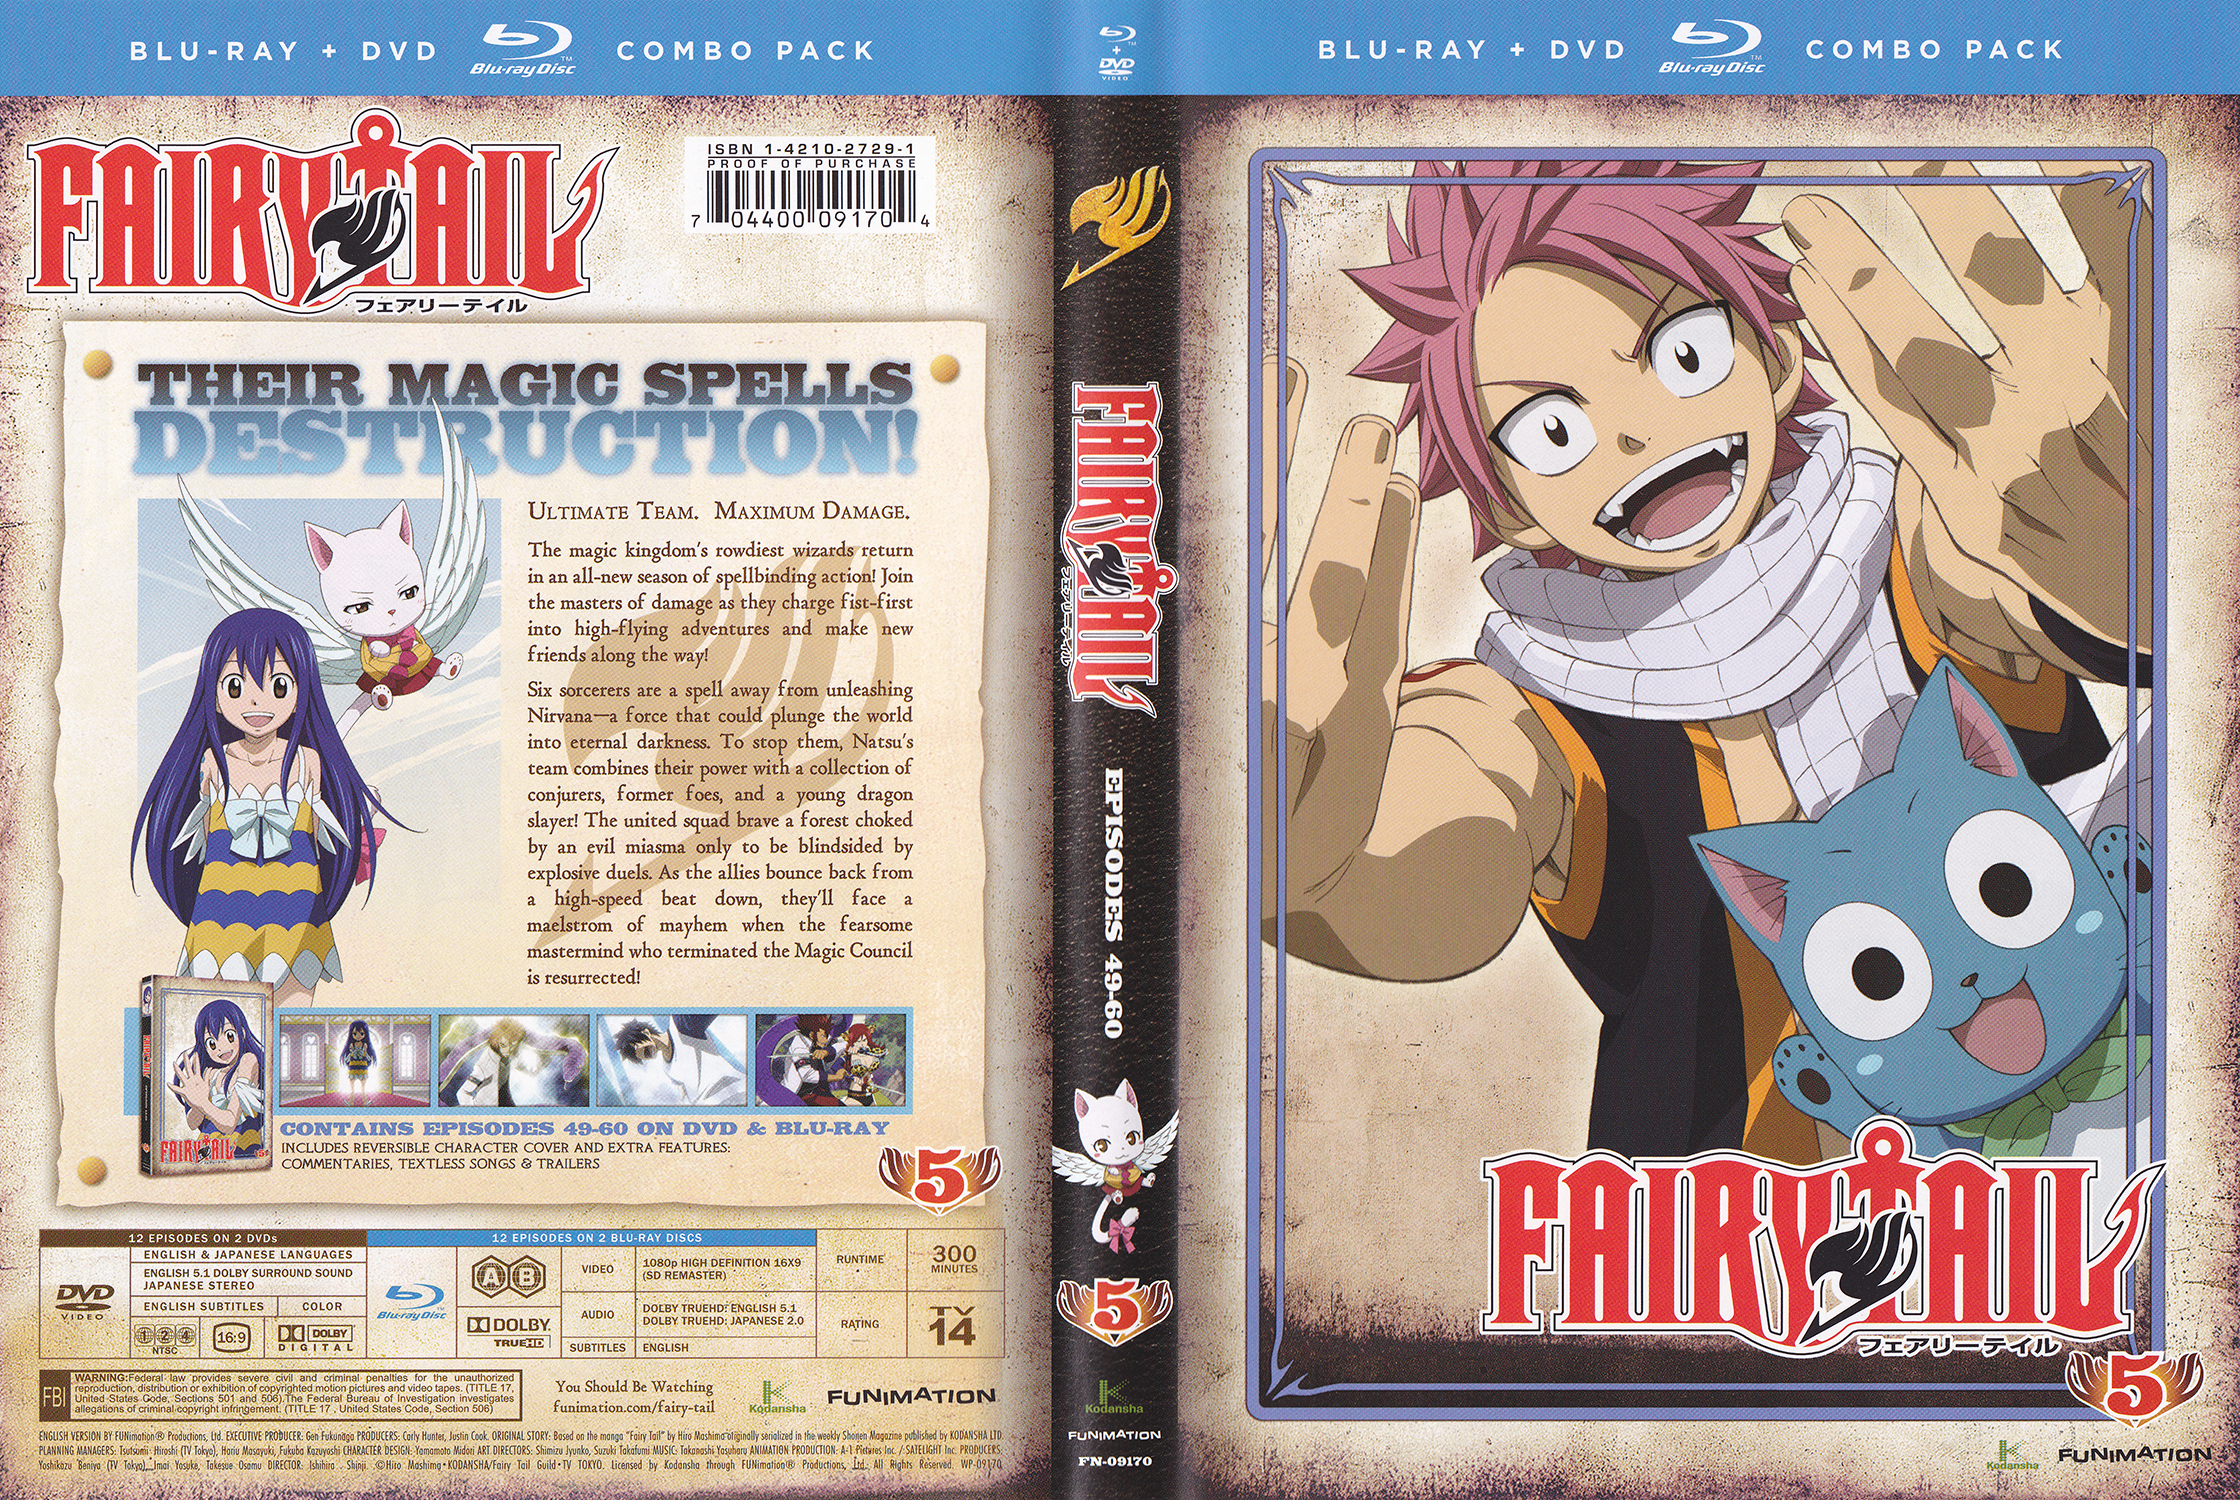 Anime Fairy Tail Dragneel Natsu Marvell Wendy Happy Fairy Tail Charles Character 2240x1500